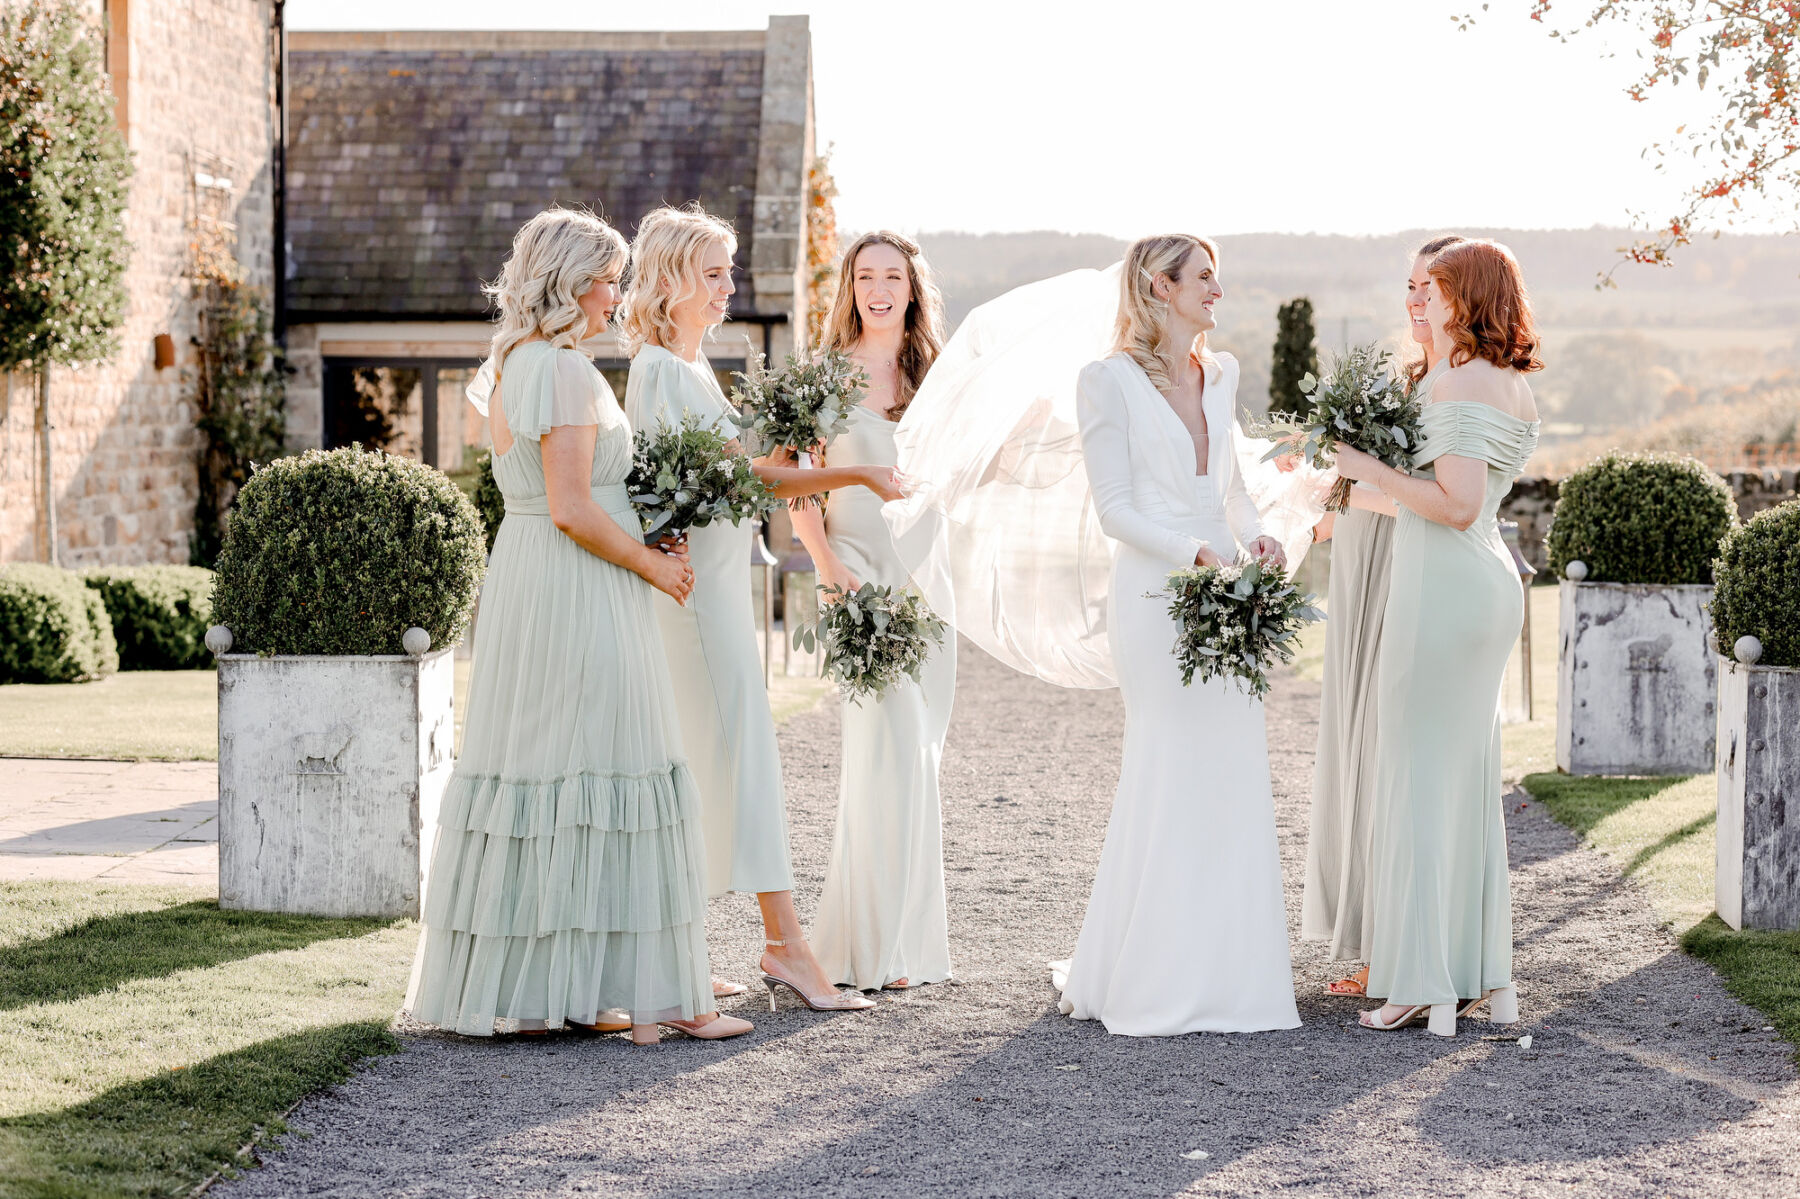 Bridesmaids in pale green dresses